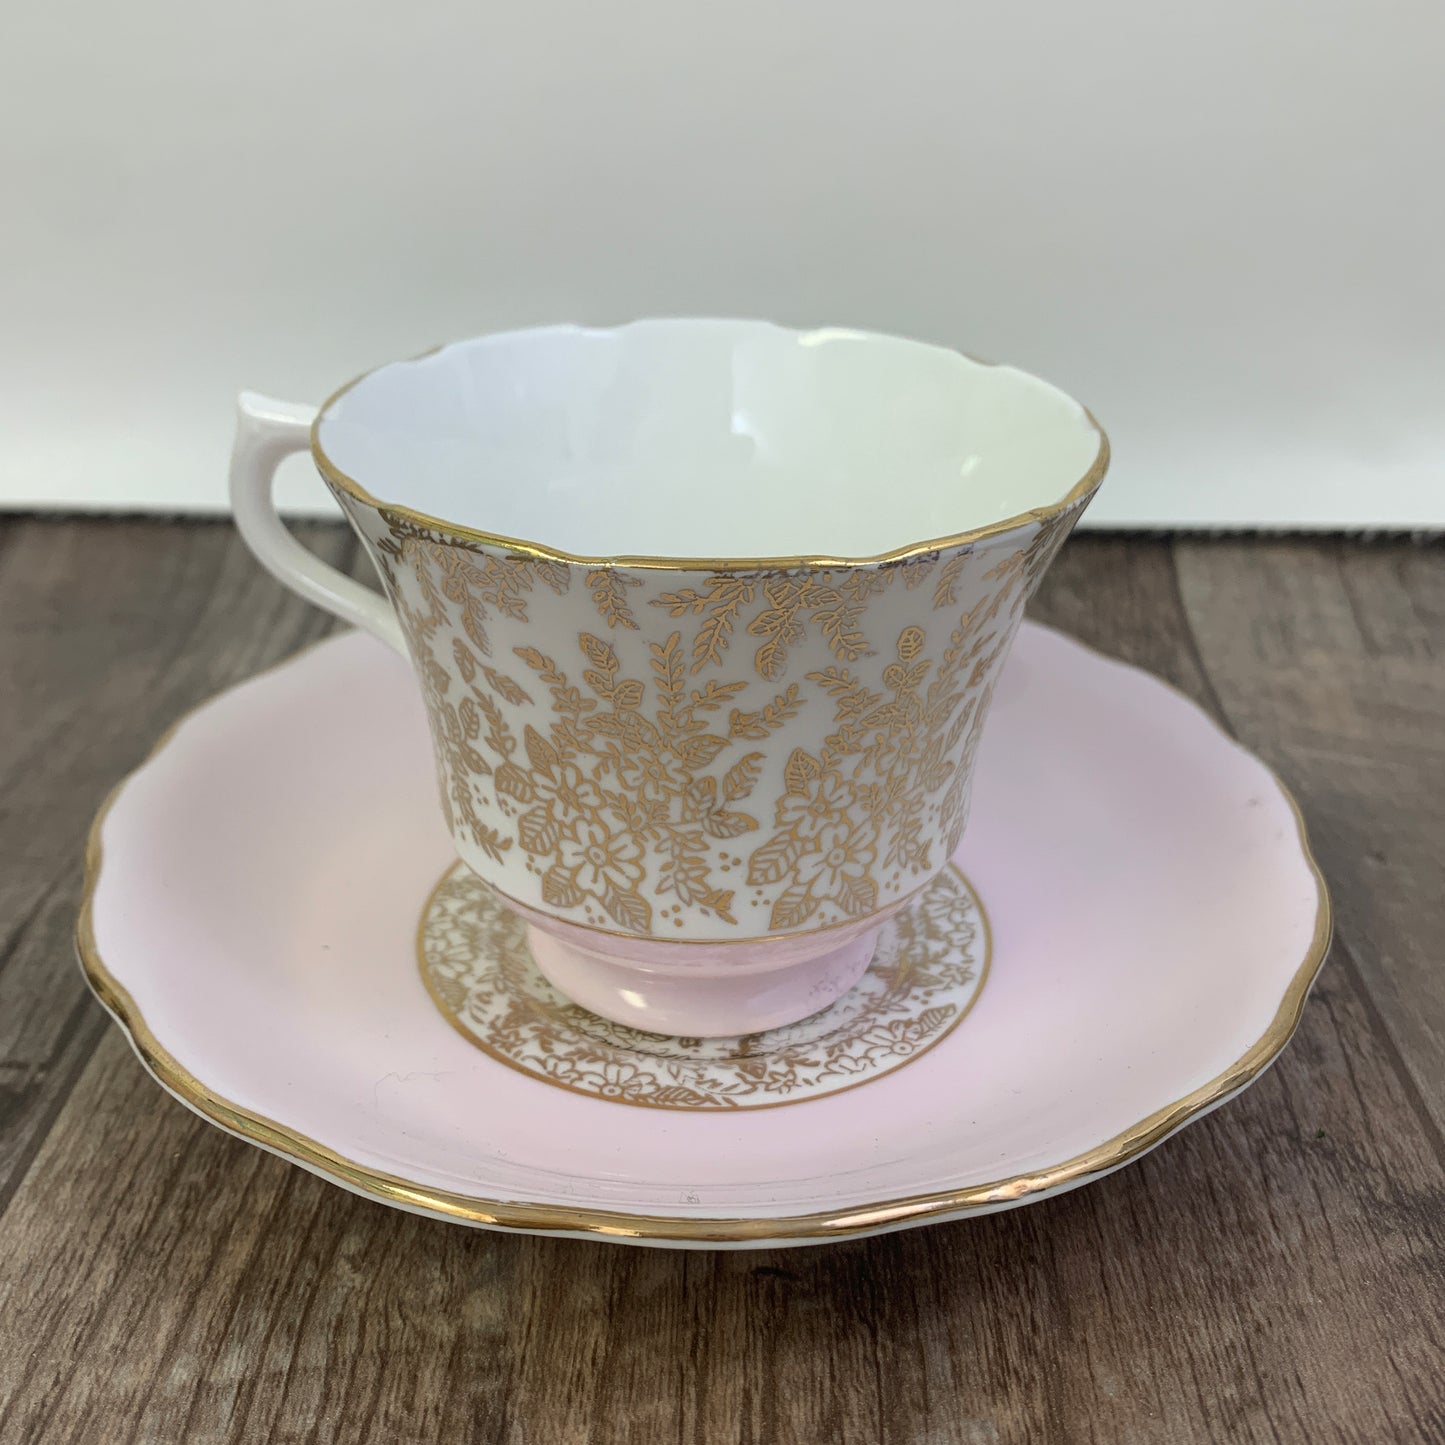 Pink and White Vintage Teacup with Gold Design, Royal Vale English Tea Cup